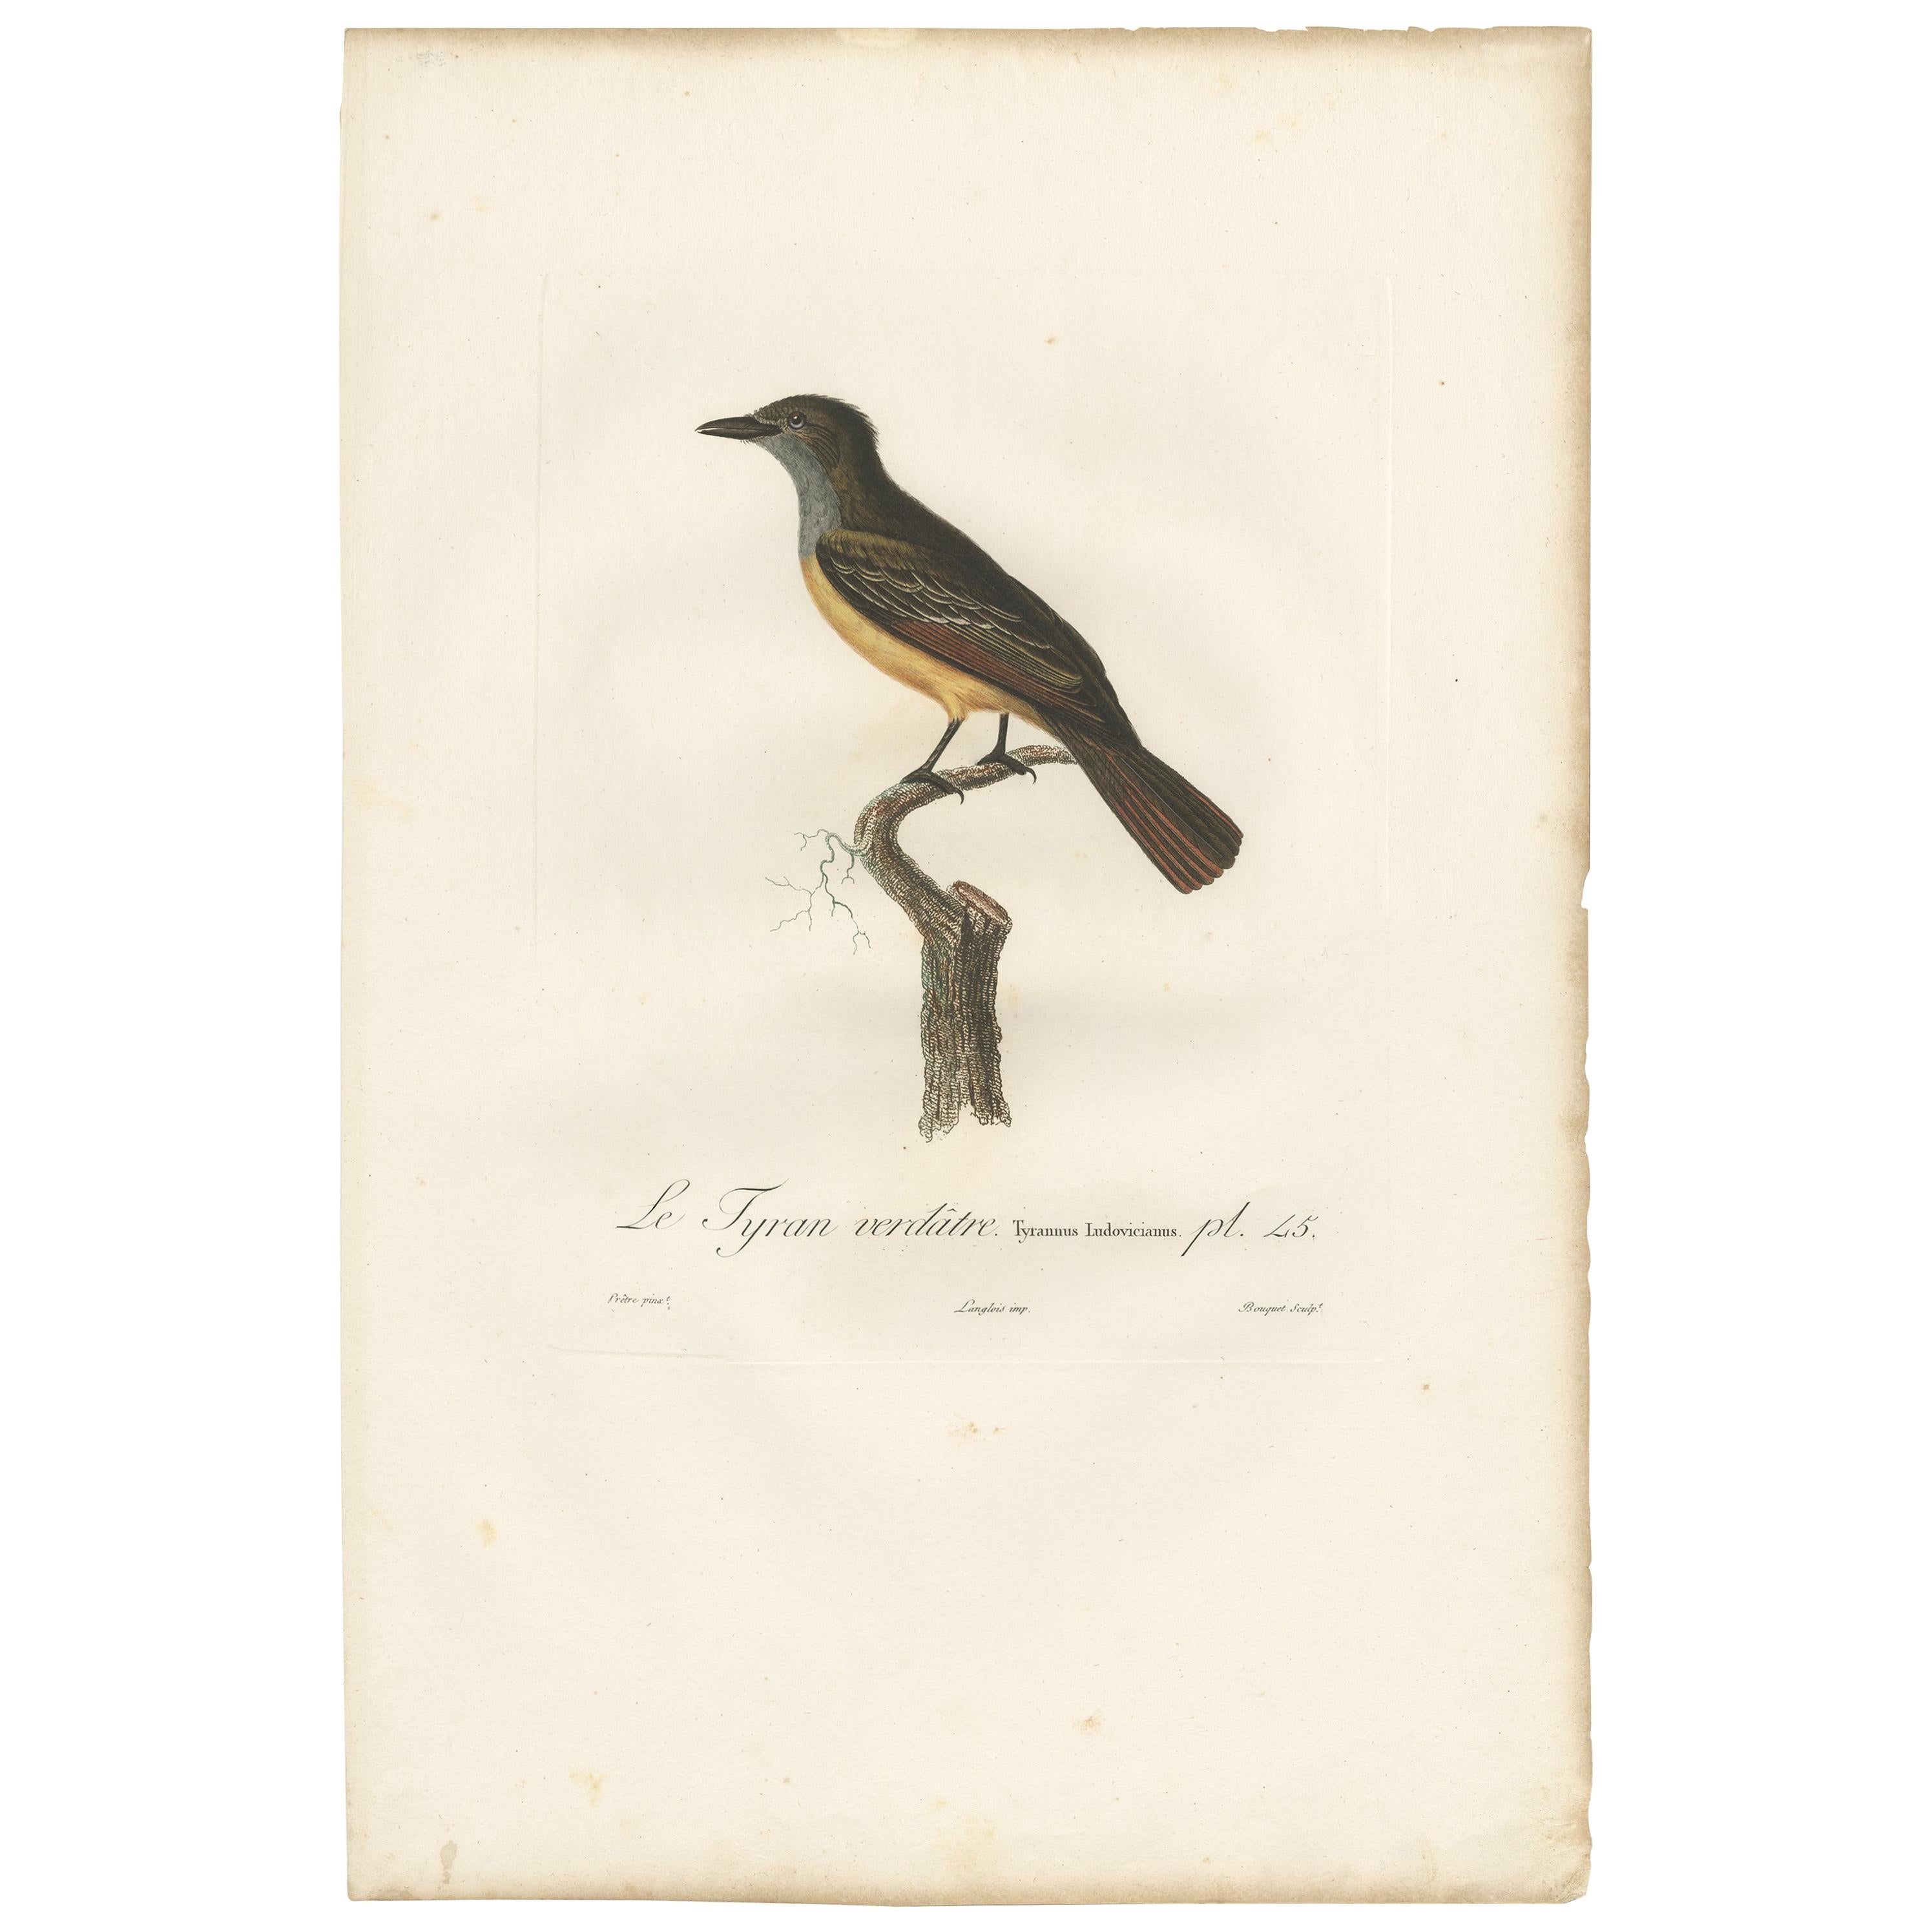 Antique Bird Print of a Tyrant Flycatcher by Vieillot, 1807 For Sale